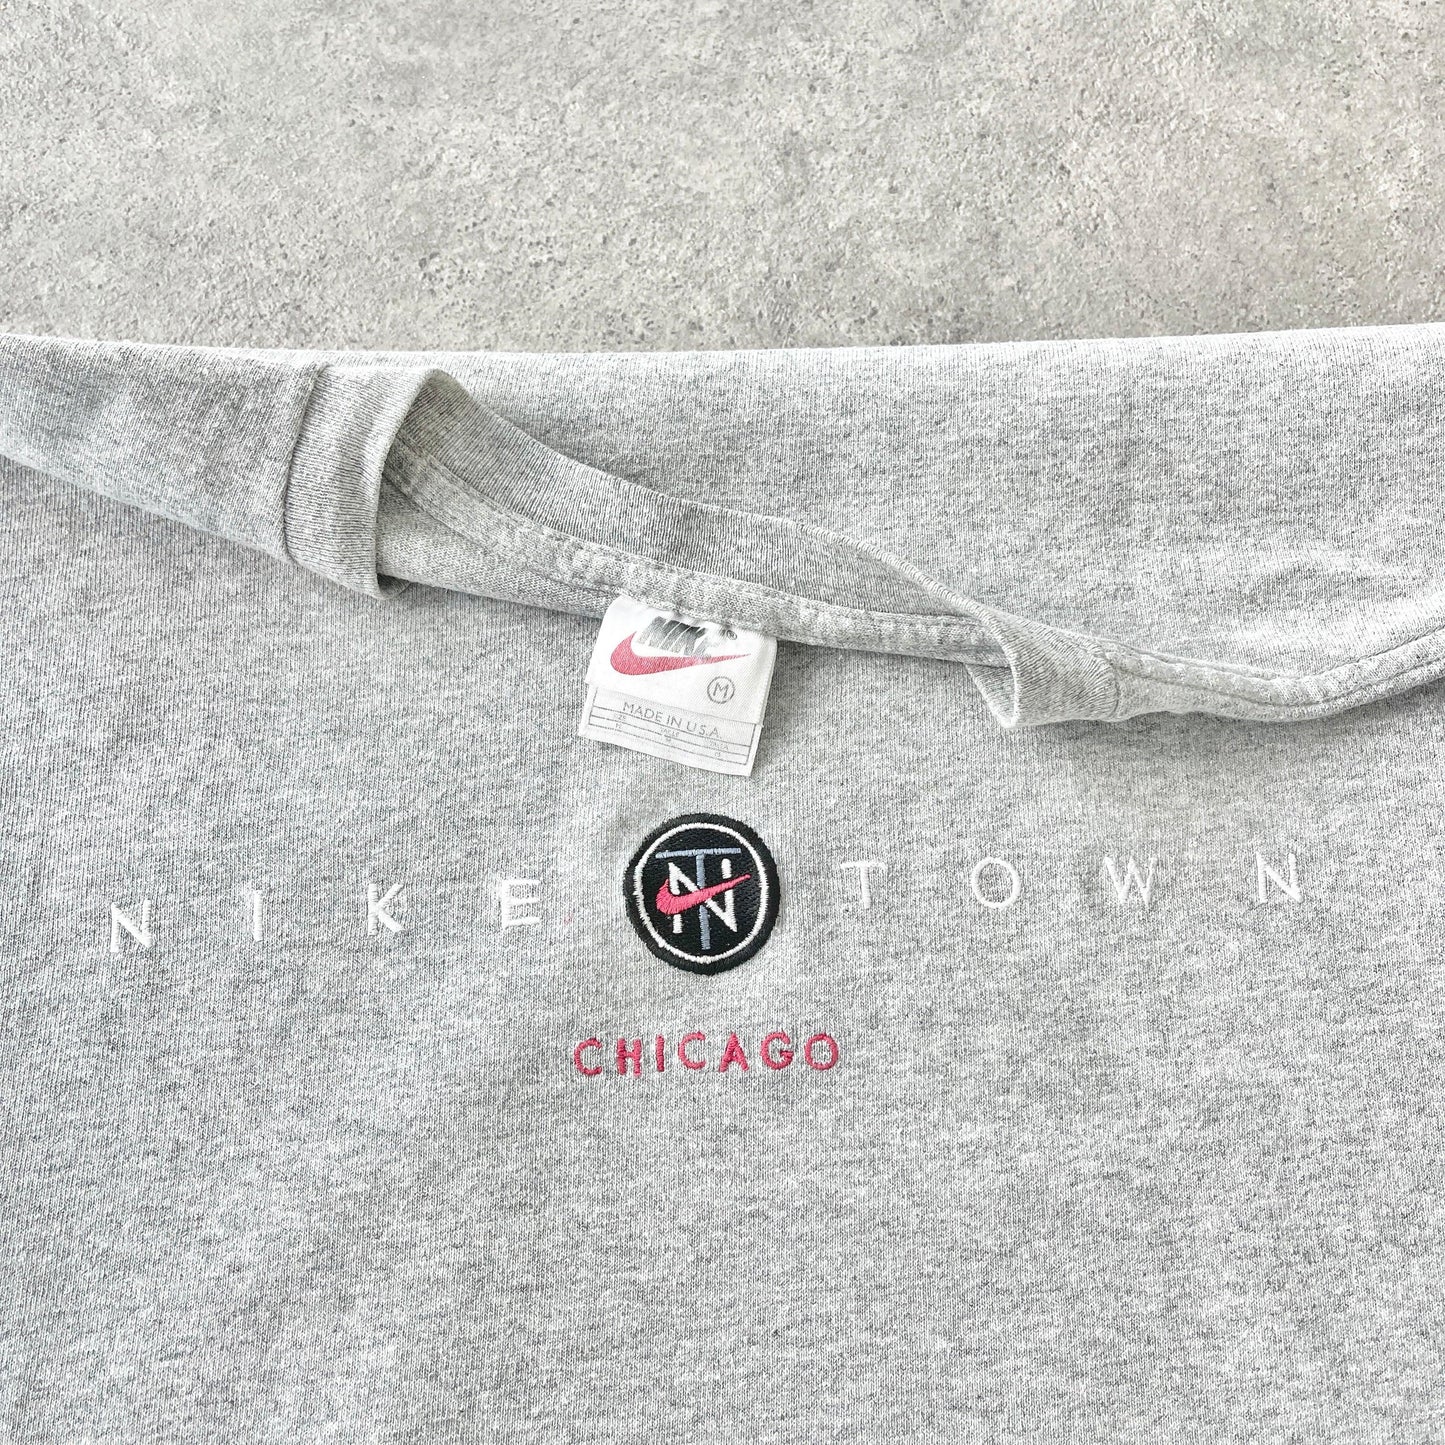 Nike Town Chicago RARE 1990s heavyweight embroidered t-shirt (M) - Known Source